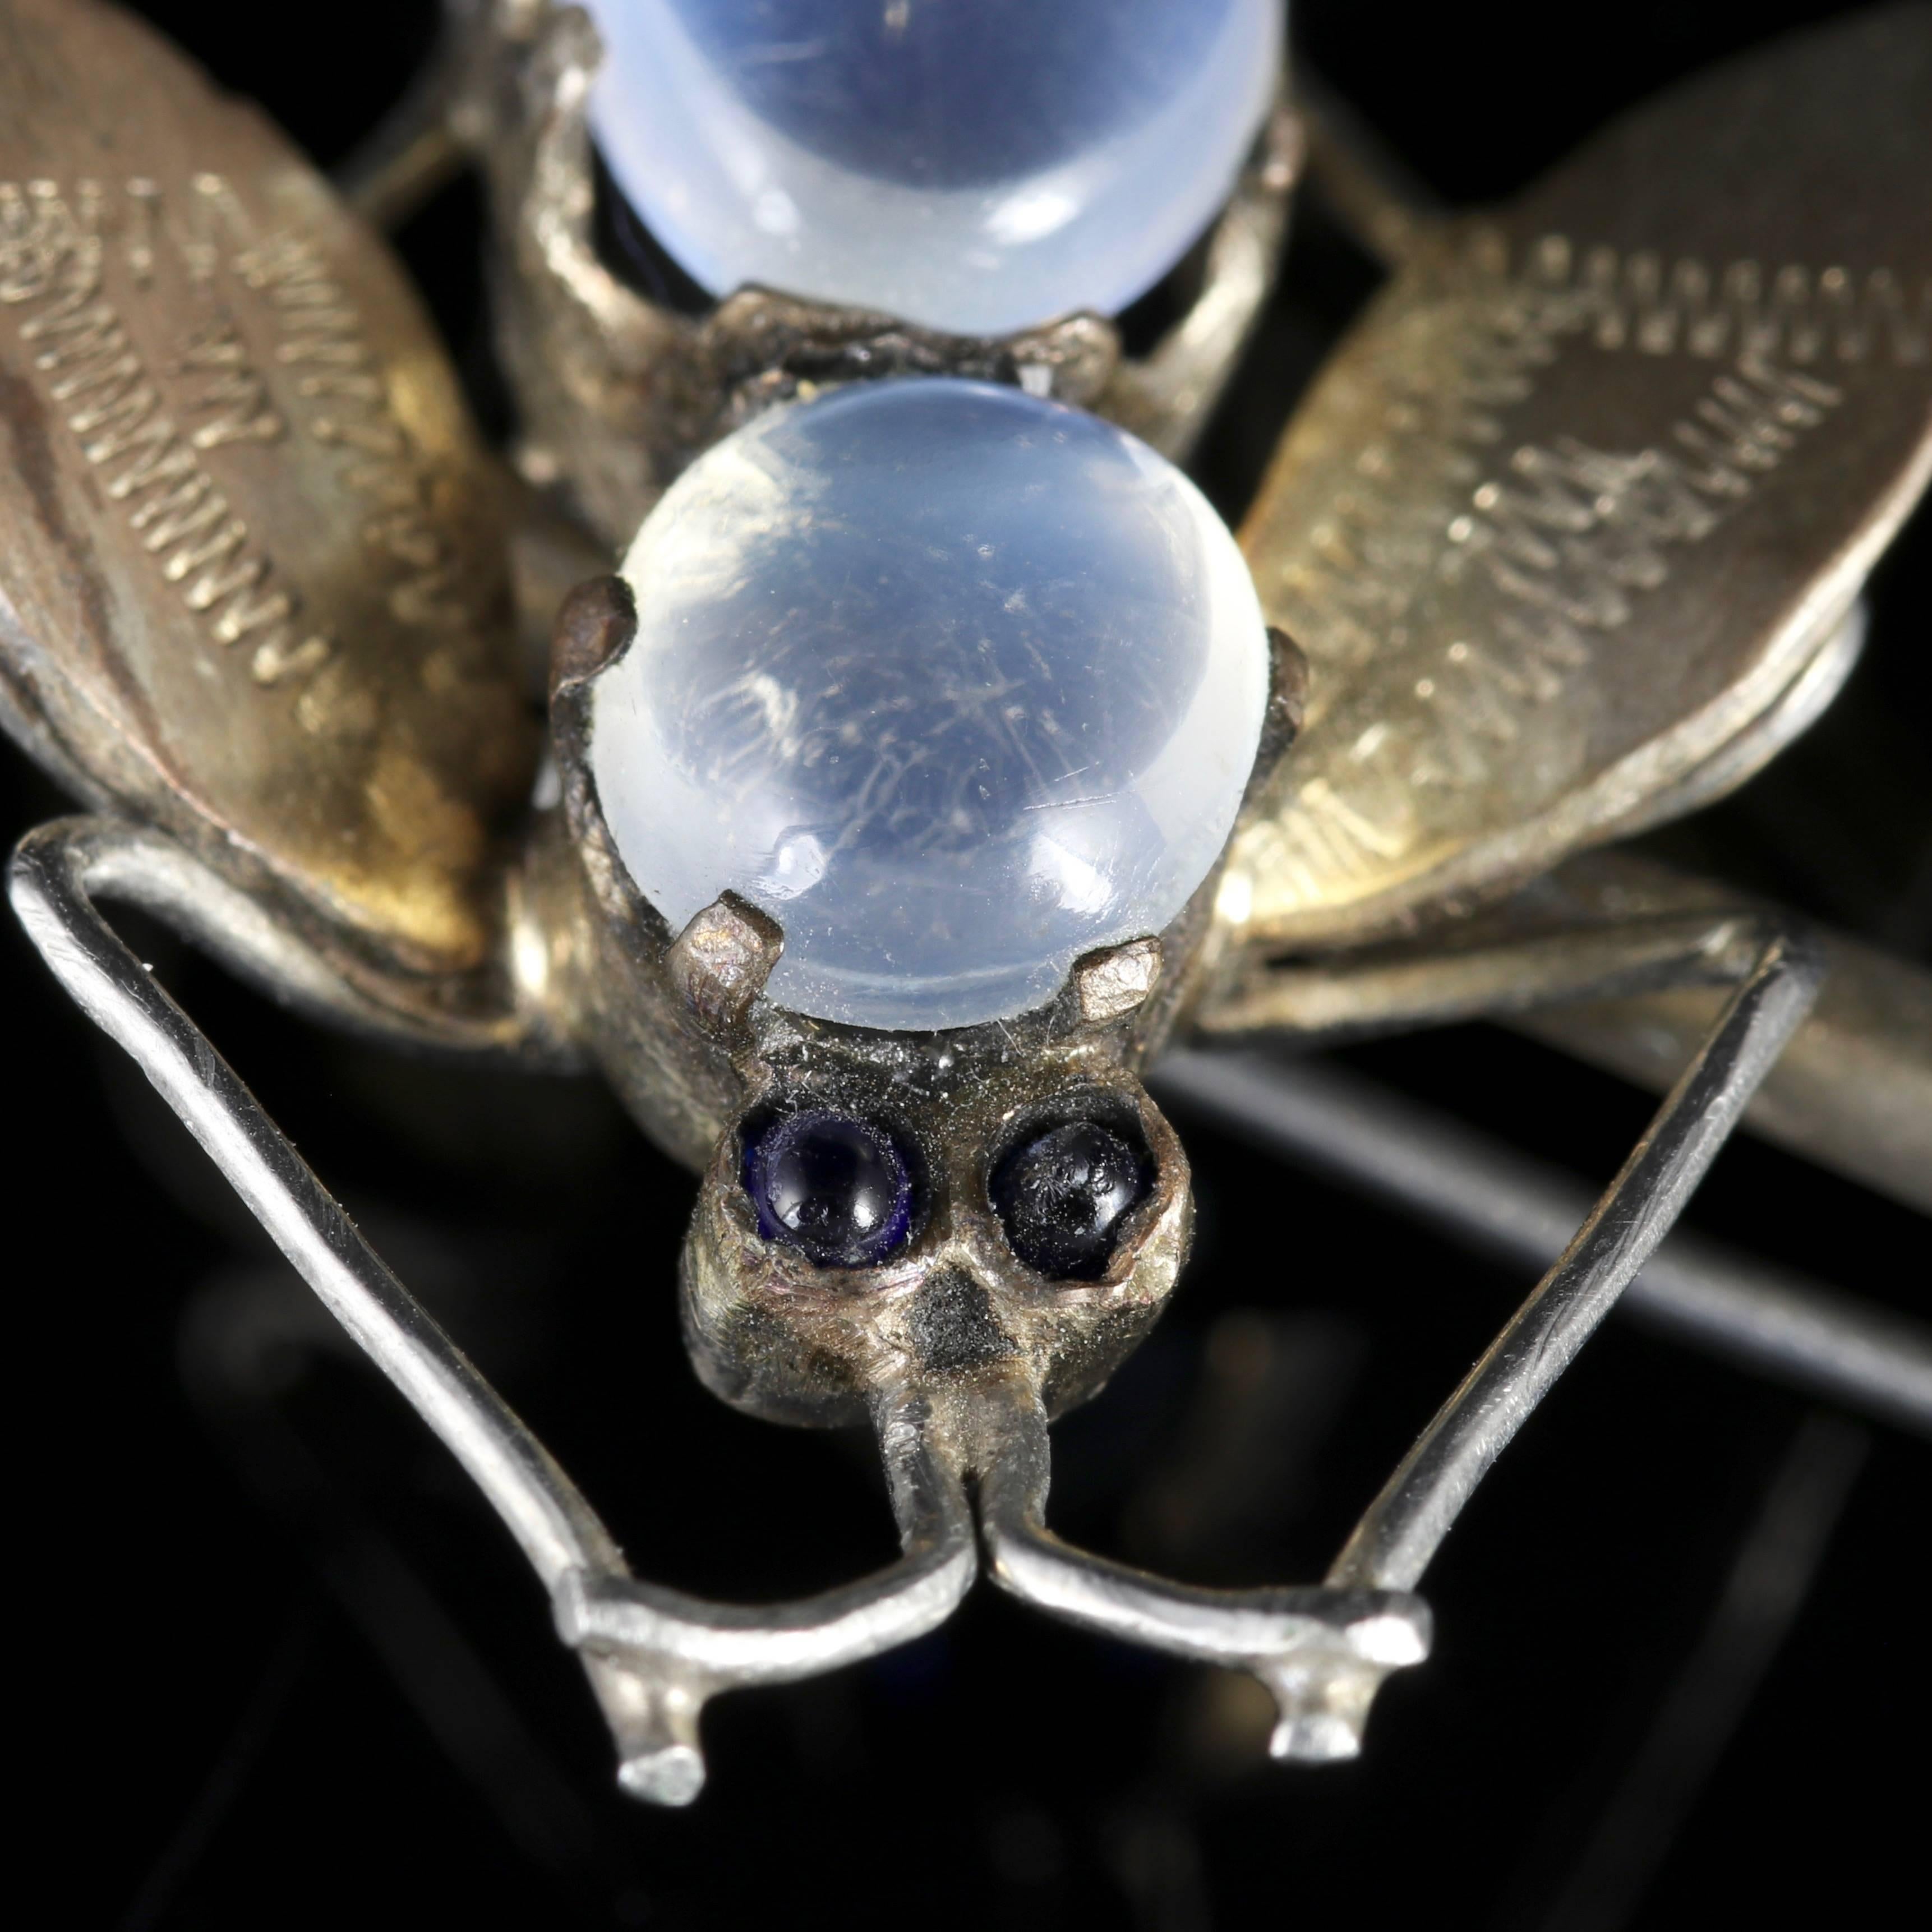 This fabulous Sterling Silver Insect Brooch is adorned with beautiful Moonstones and Cabochon Sapphires. 

All genuine Victorian, circa 1900. 

The Sterling Silver Insect has lovely all round engraving with two pale blue Moonstones on it’s back.